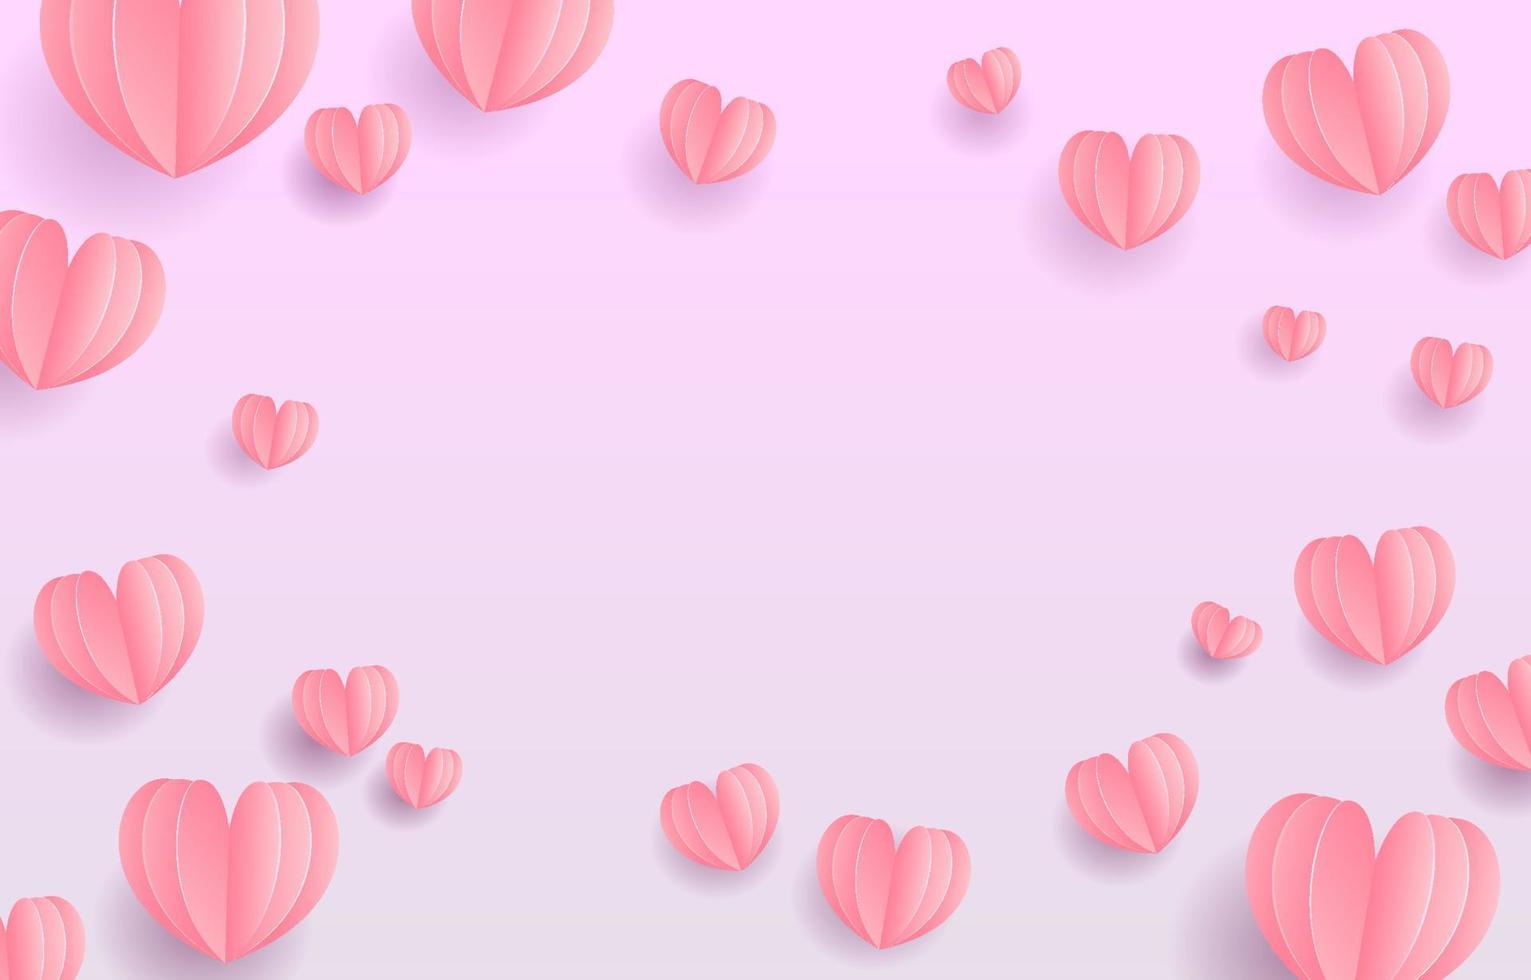 Illustration background Love Concept.Sweet pink color, perfect for Valentine's Day or love communication.Illustration with hearts and glitter twinkle. design for banner, invitation card, coupon. vector